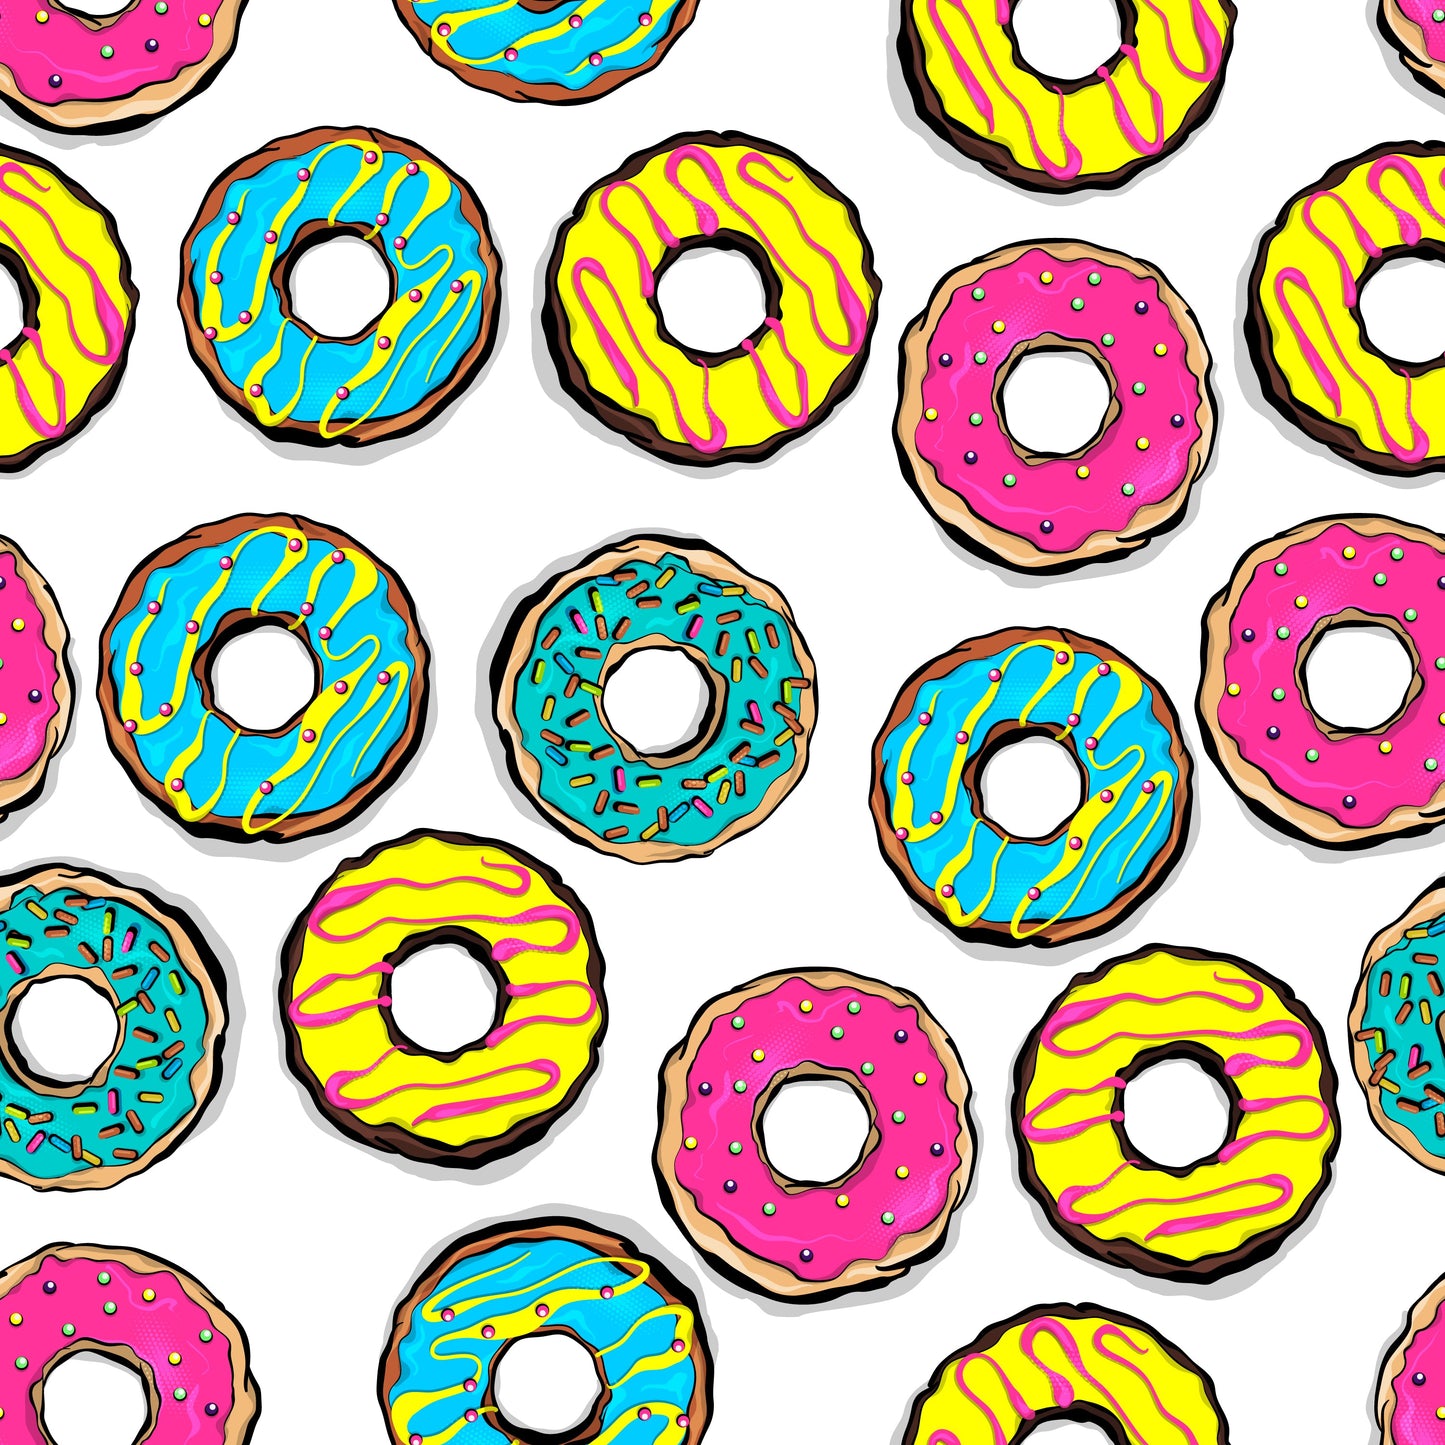 Multi-colored Graphic Donuts (Adhesive Vinyl - 12" x 12" Printed Sheet)